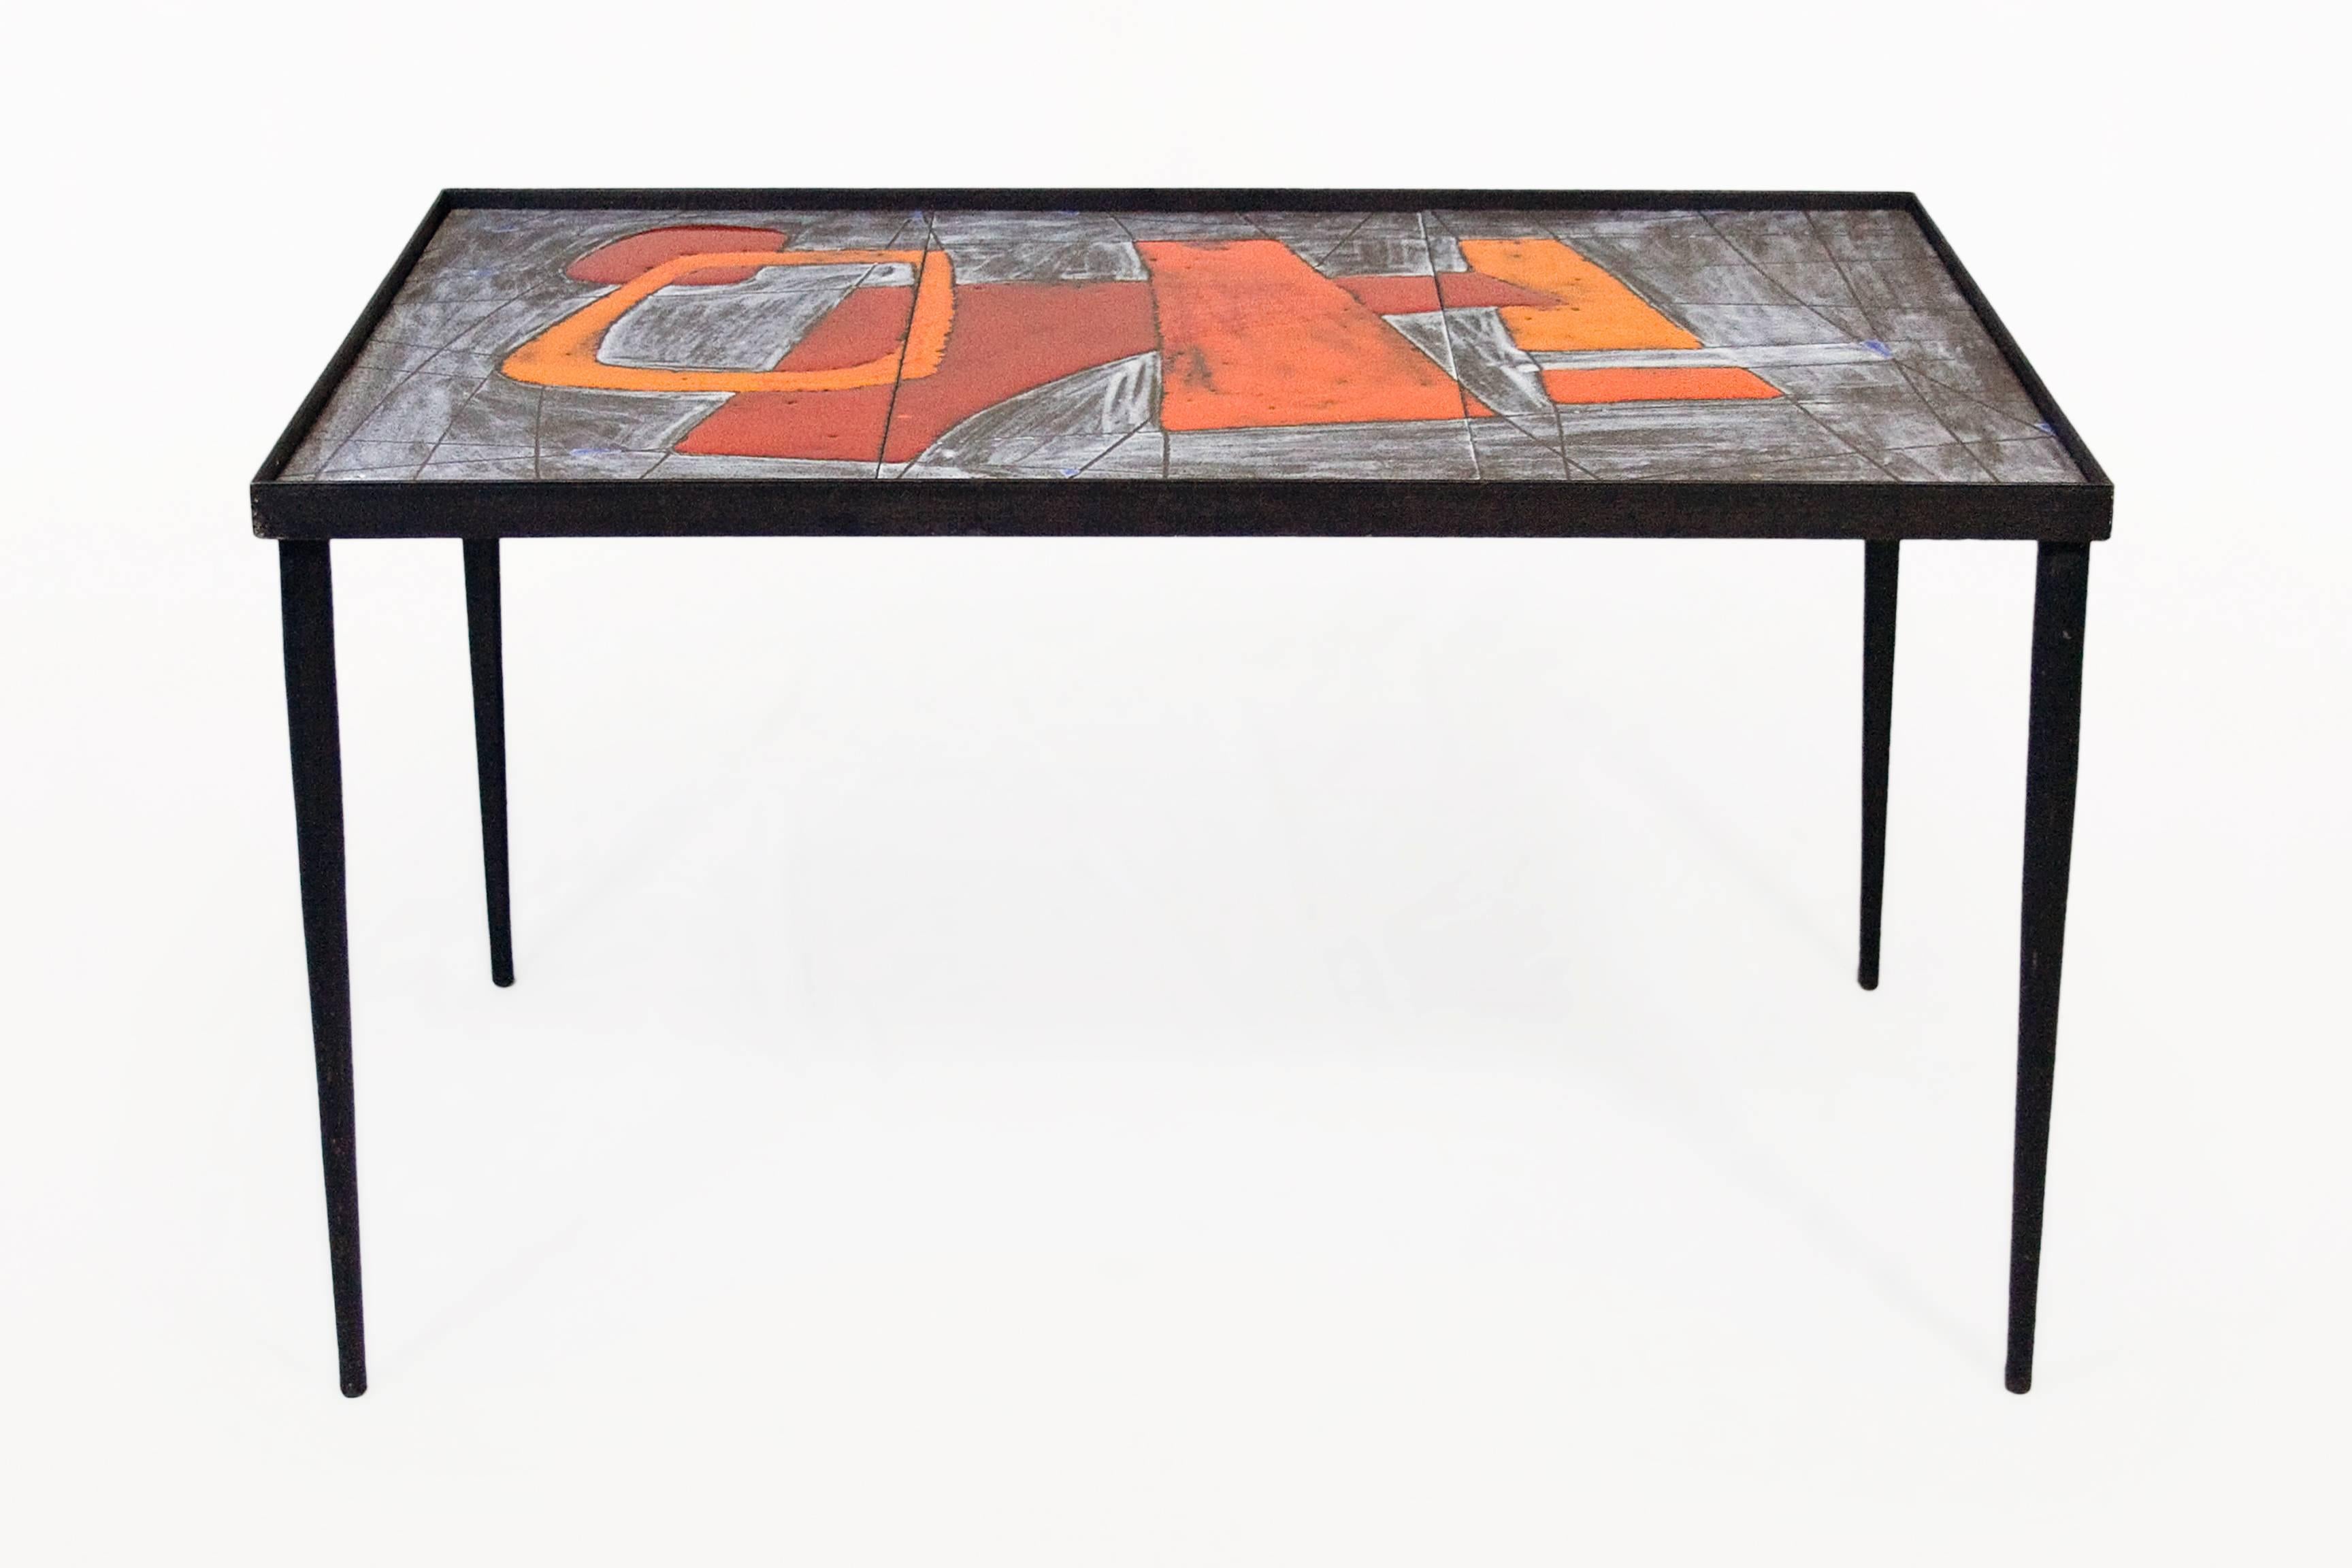 Pair of Robert and Jean Cloutier ceramic coffee tables.
Geometric forms.
Ceramic and glazed top with metal leg structure,
circa 1960, France.
Documentation: 